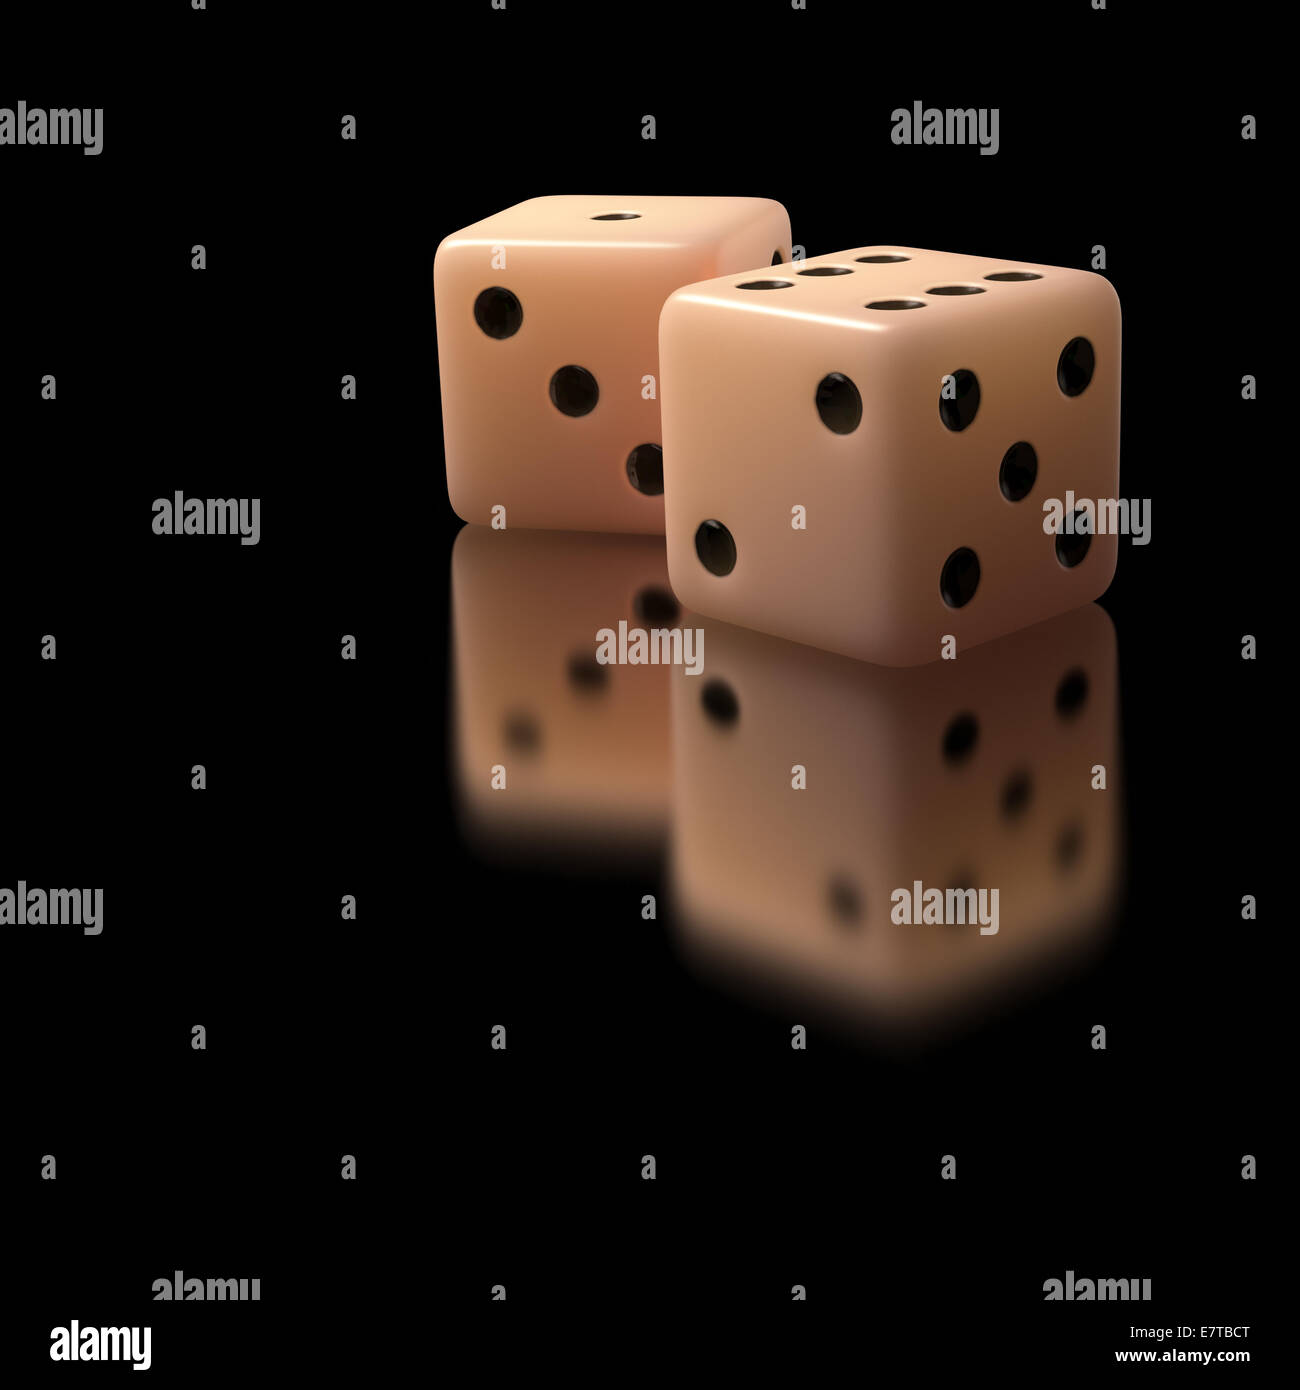 Two dice casino gambling on black reflective background. Clipping path included. Stock Photo